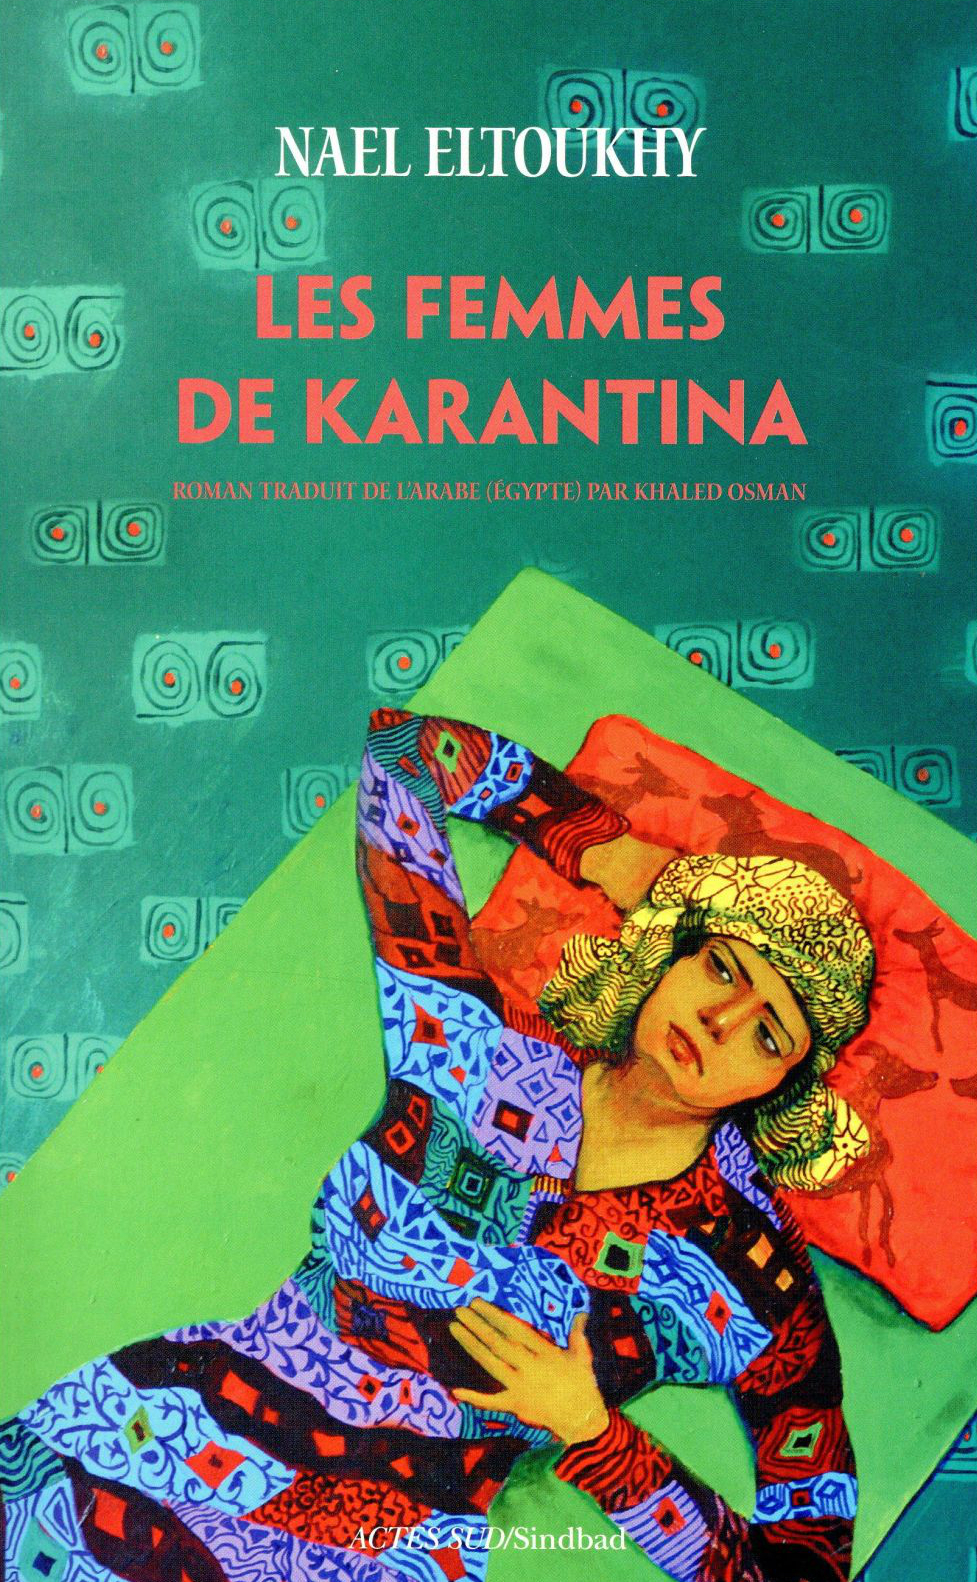 The French edition of Nael el-Toukhy’s Women of Karantina.